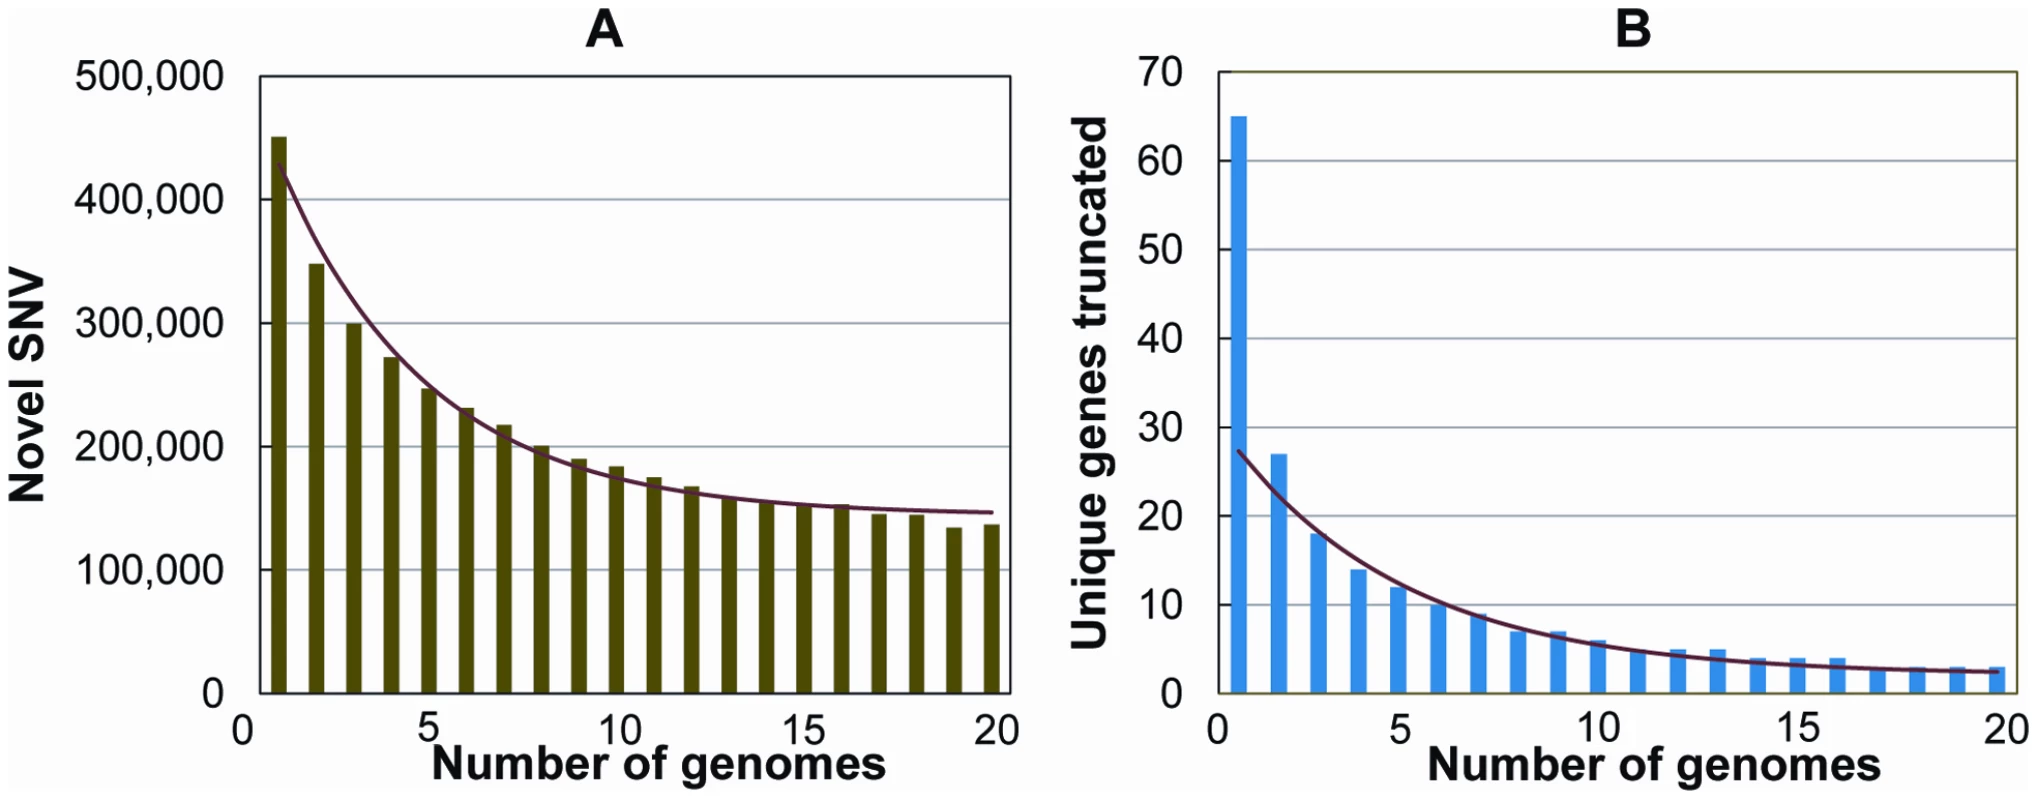 Number of novel SNVs and novel knocked-out genes as the number of genomes increases.